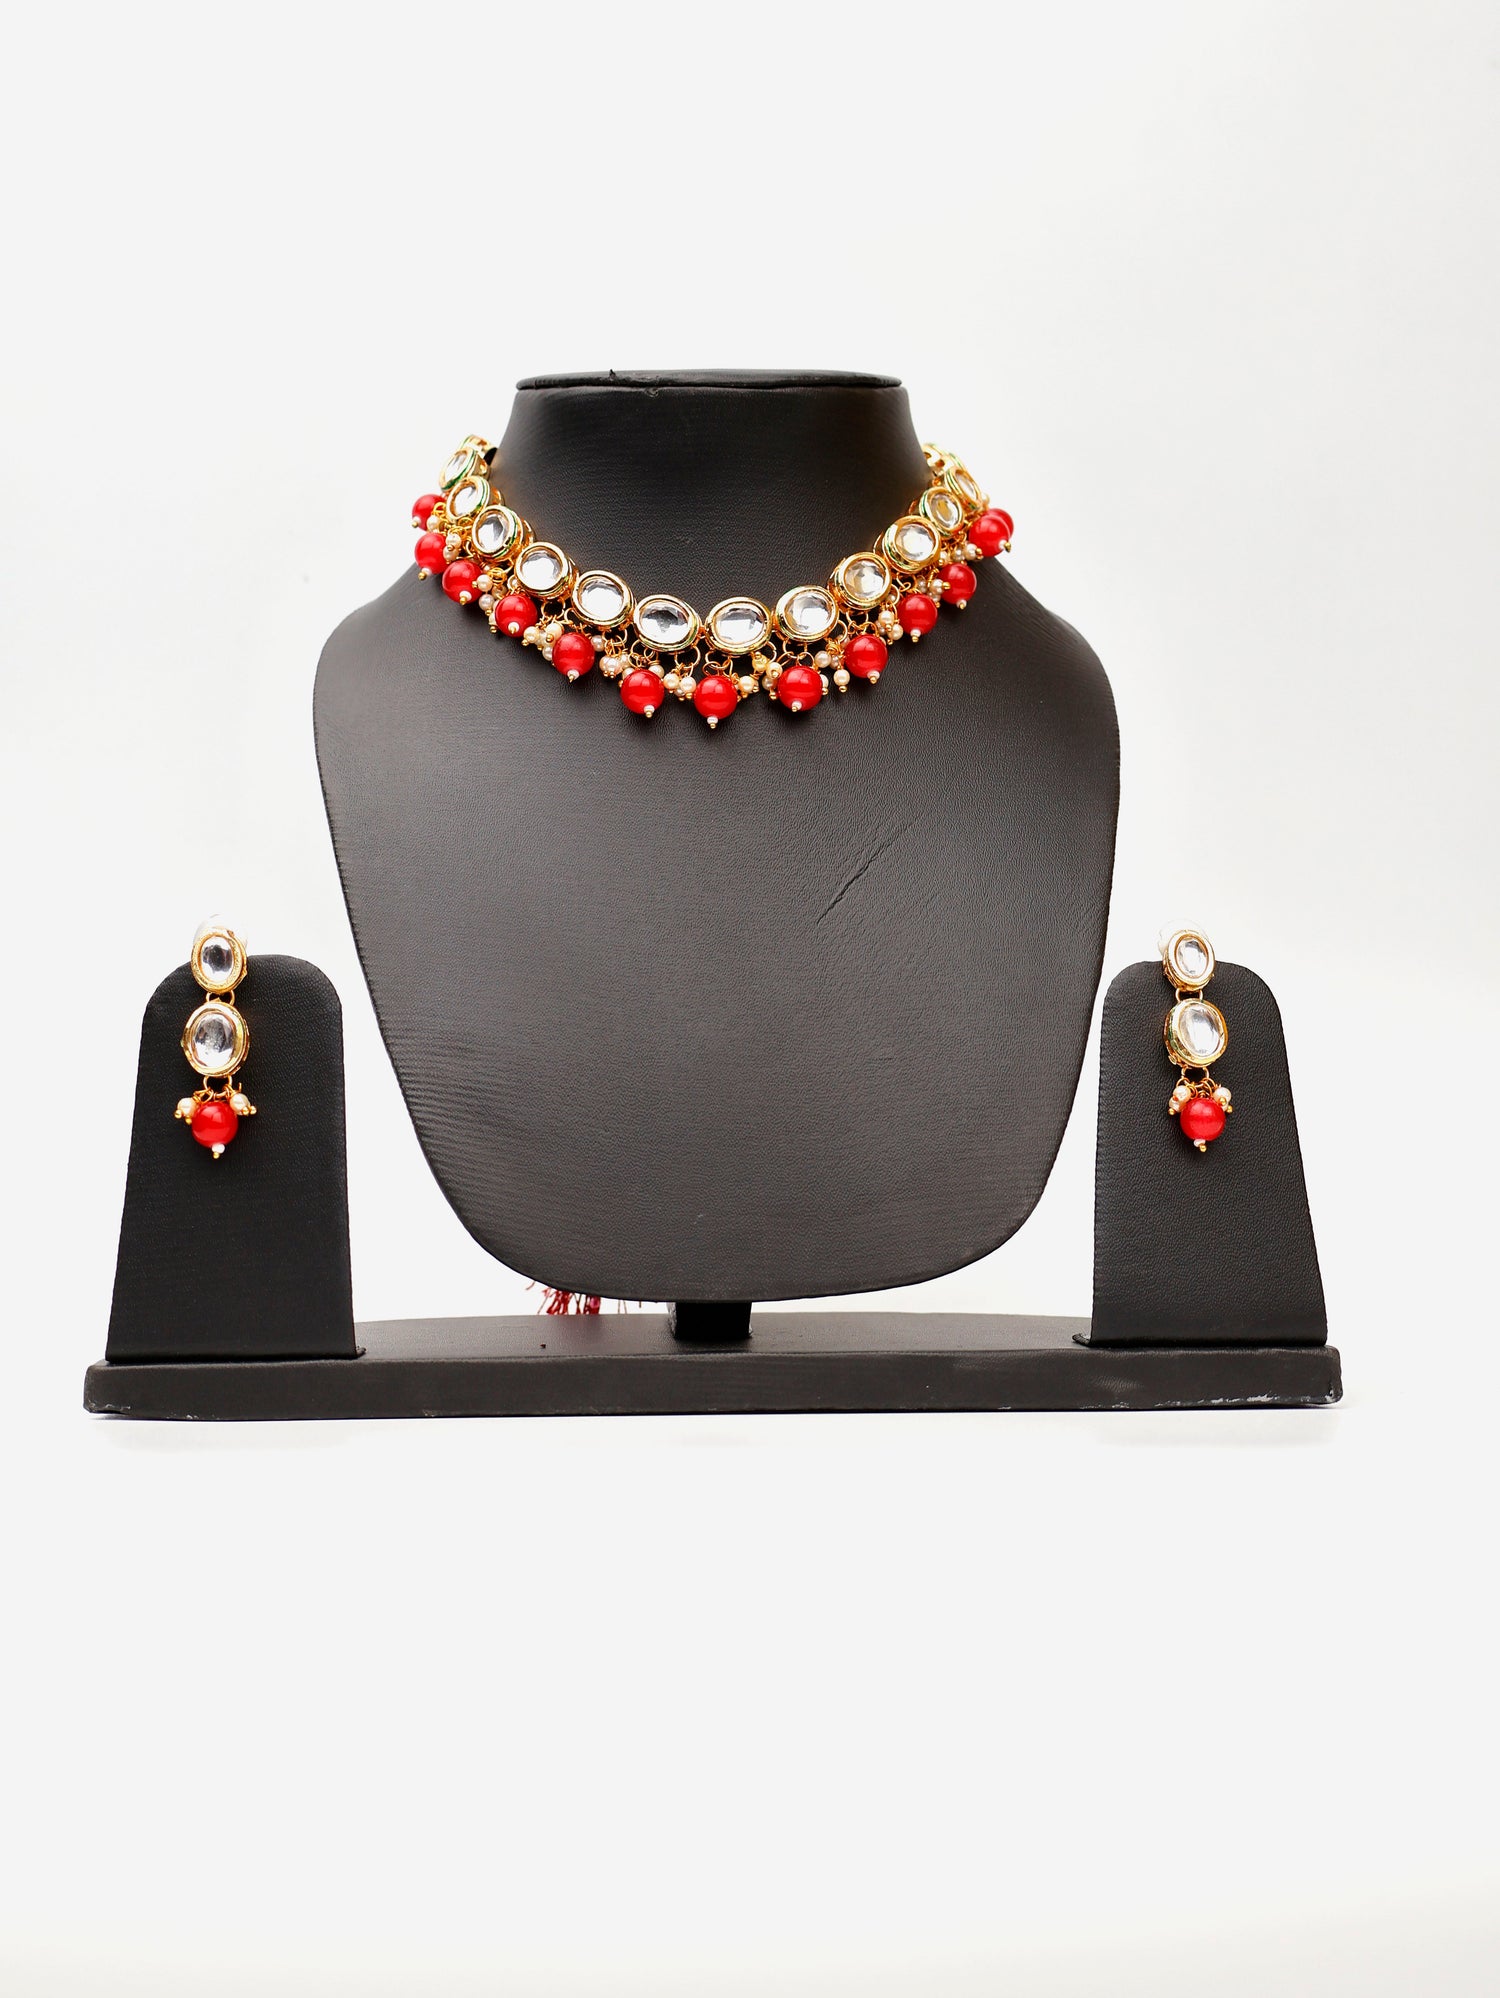 Kundan and Red Studs Necklace Set Fashion Jewelry for Party Festival Wedding Occasion in Noida